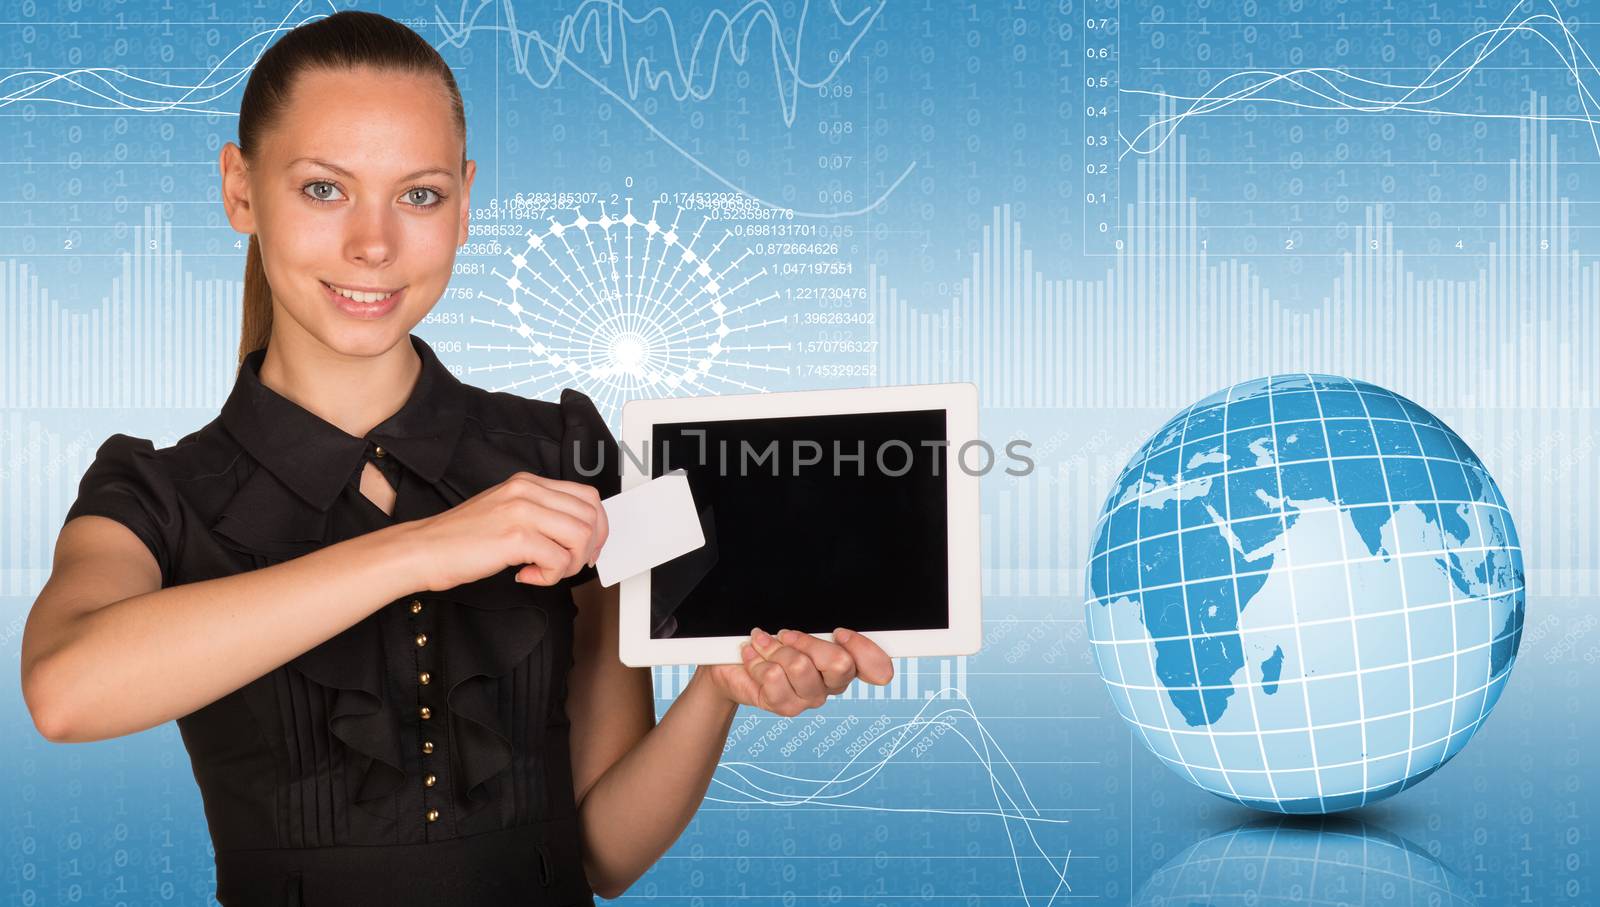 Young woman holging tablet and looking at camera. Model of earth on light background with graphical charts. Elements of this image furnished by NASA